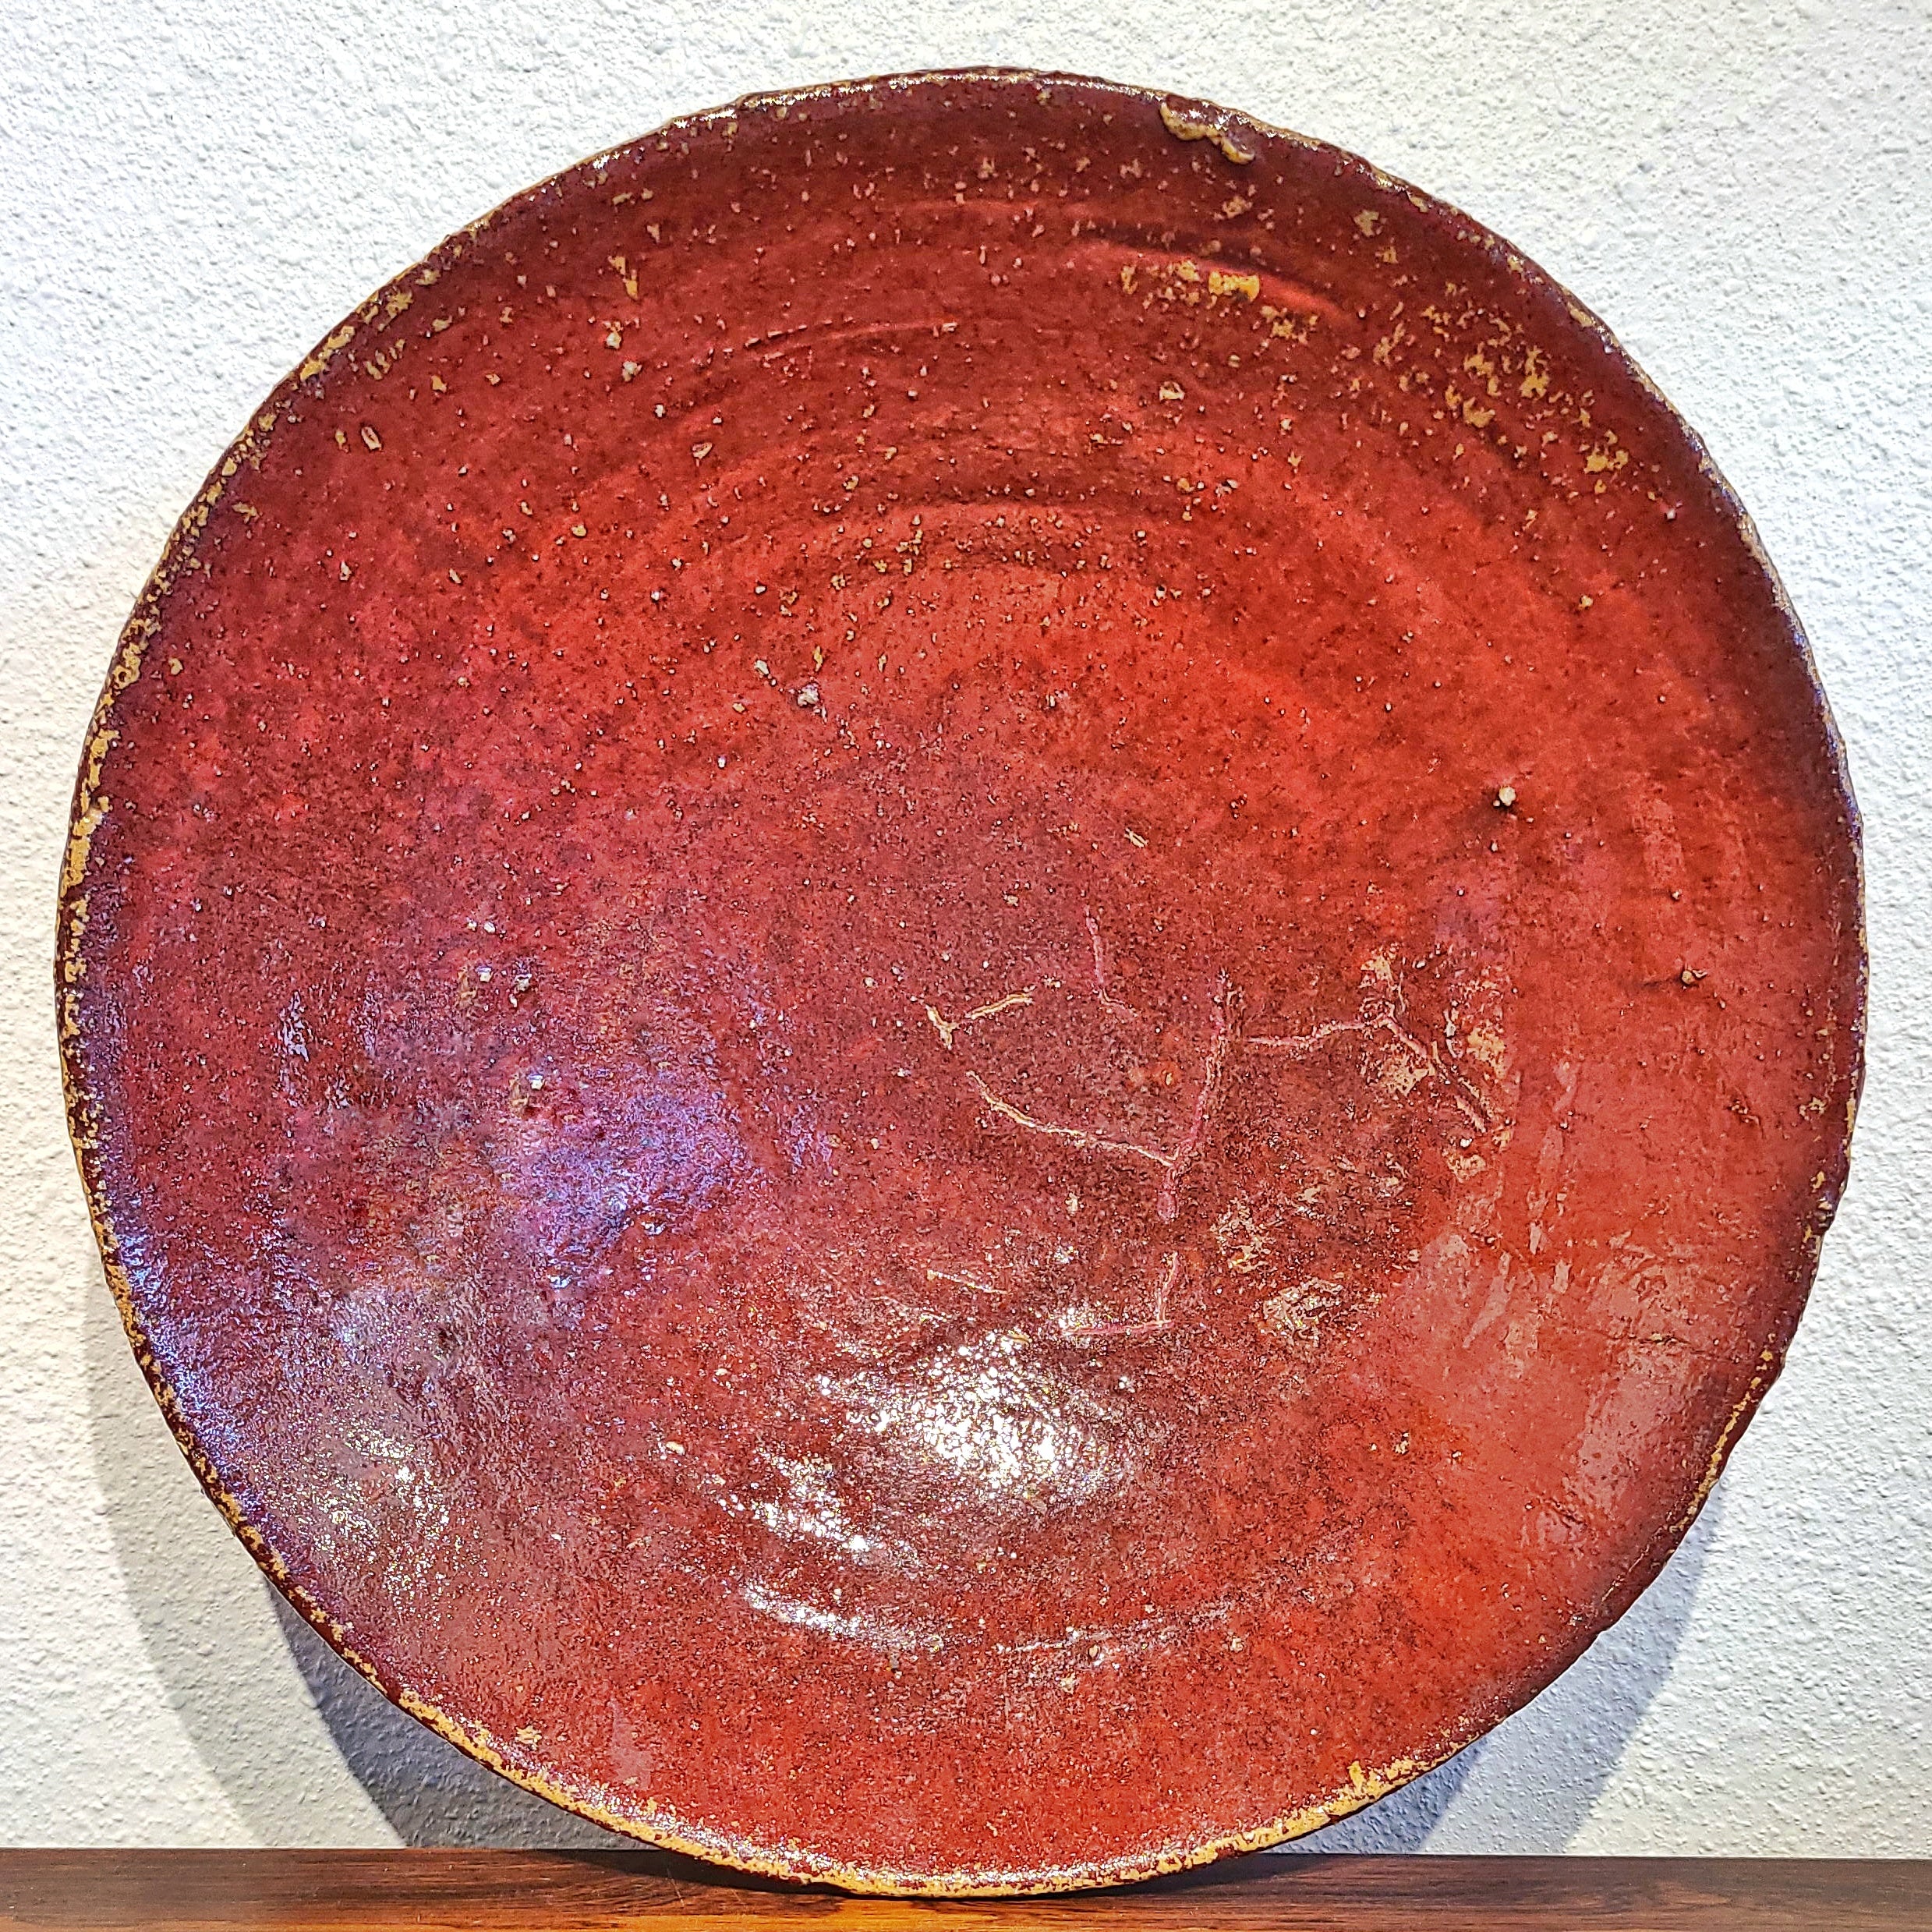 CHINESE EARTHENWARE CENTERPIECE BOWL WITH OXBLOOD GLAZE (13.25")